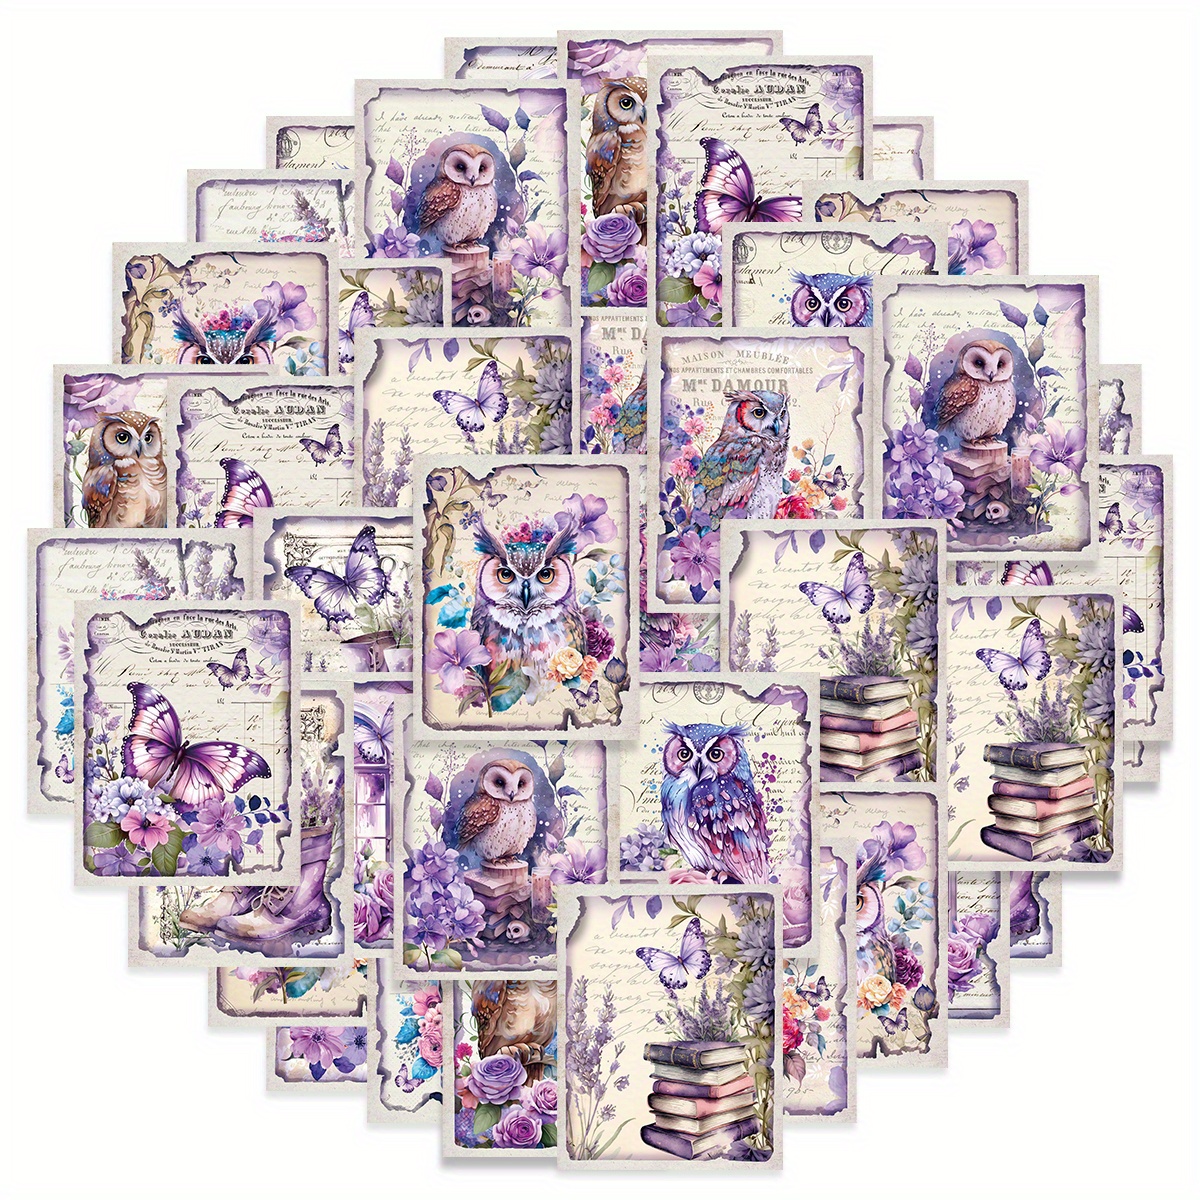 

30pcs Purple Owl Stickers, Fantasy Forest Animals Light Paper Creative Decorative Stickers, Suitable For Luggage, Tables, Slightly Larger Items Decoration